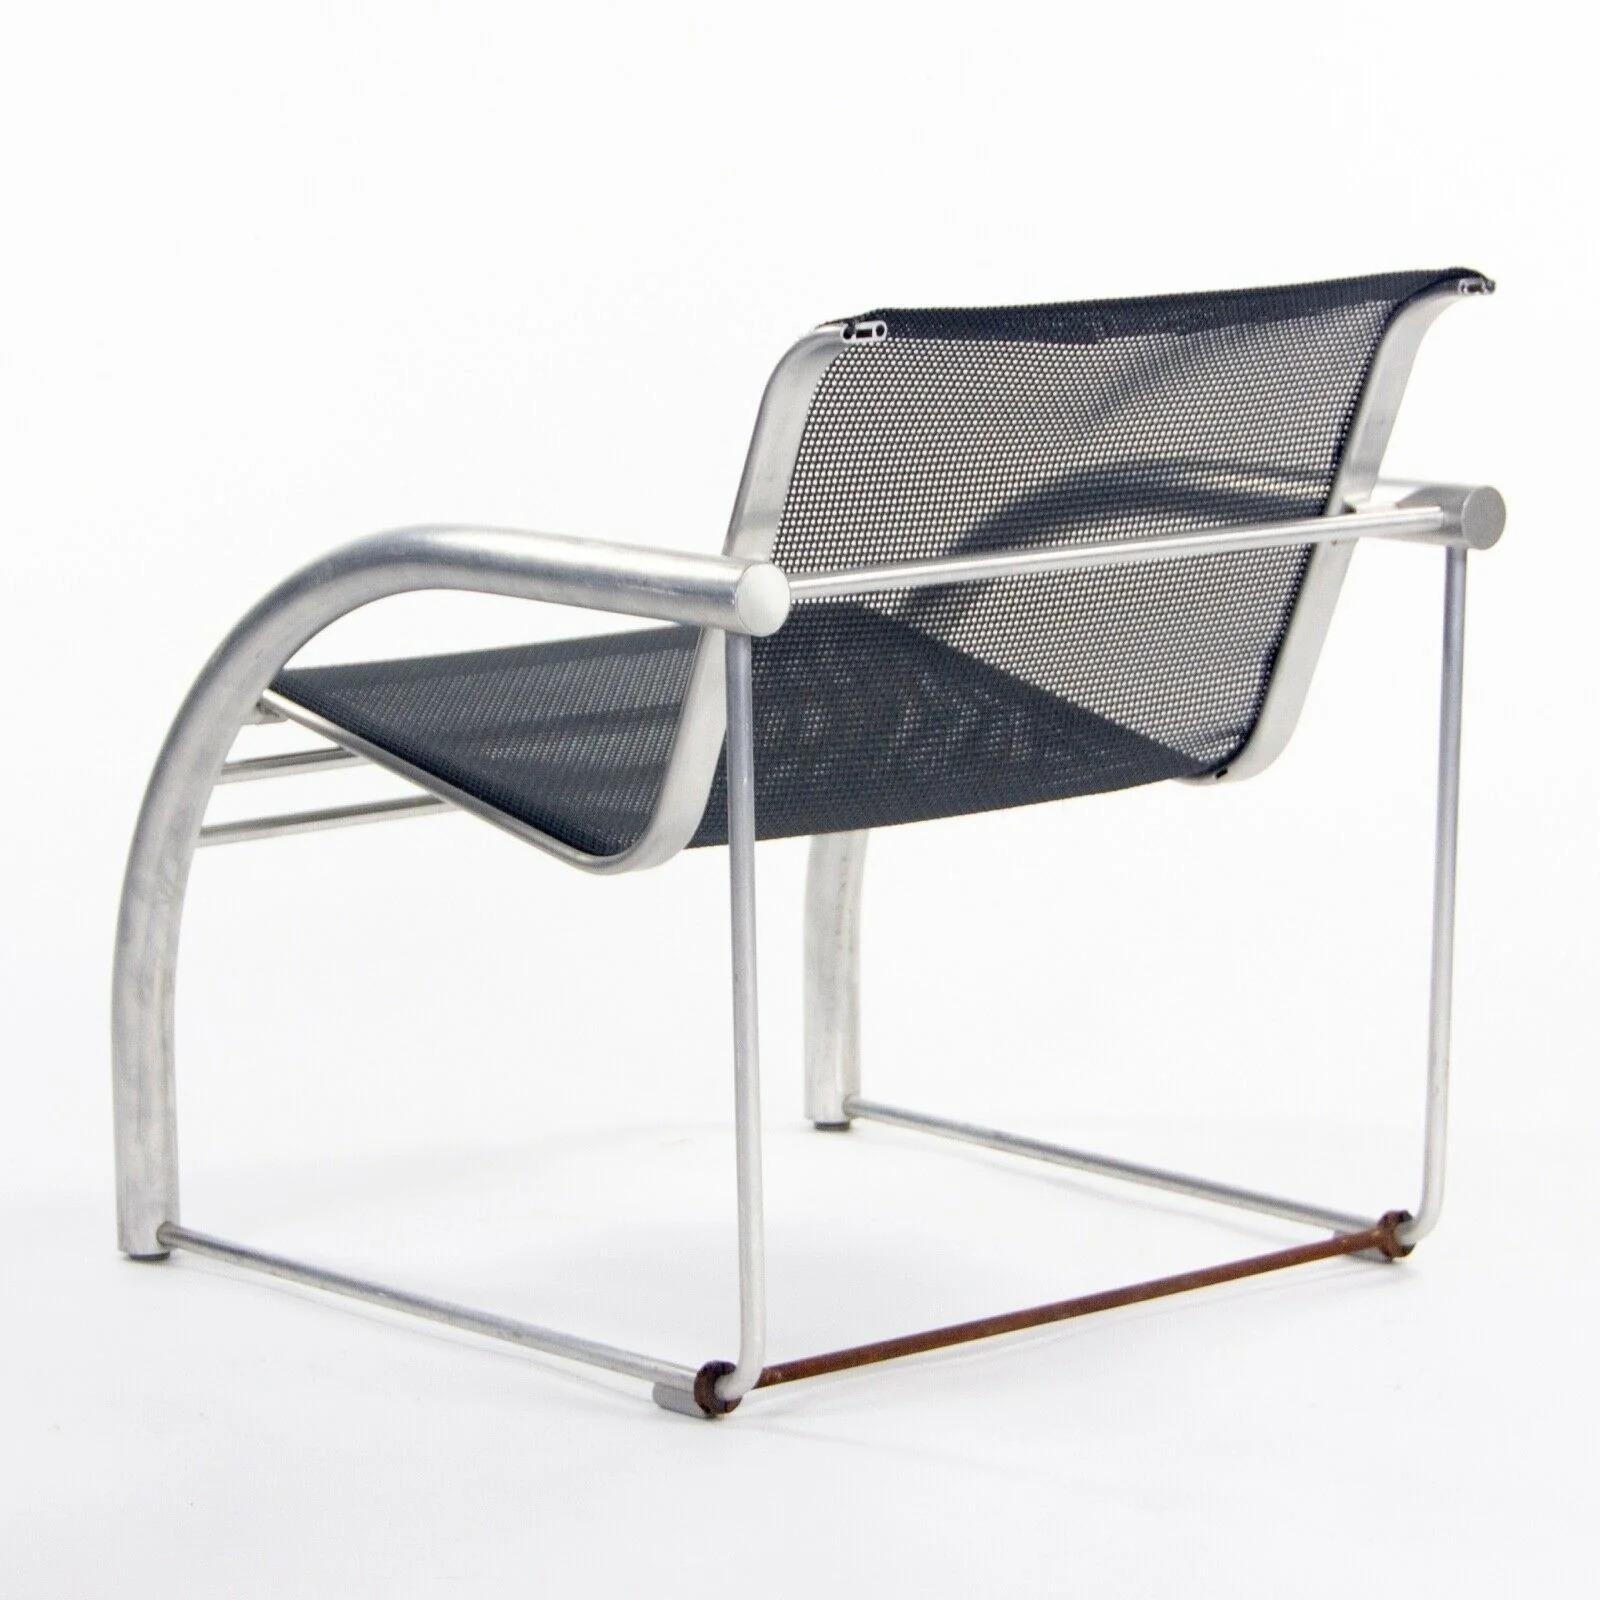 Contemporary 2011 Prototype Richard Schultz Mateo Collection Raw Aluminum & Mesh Dining Chair For Sale